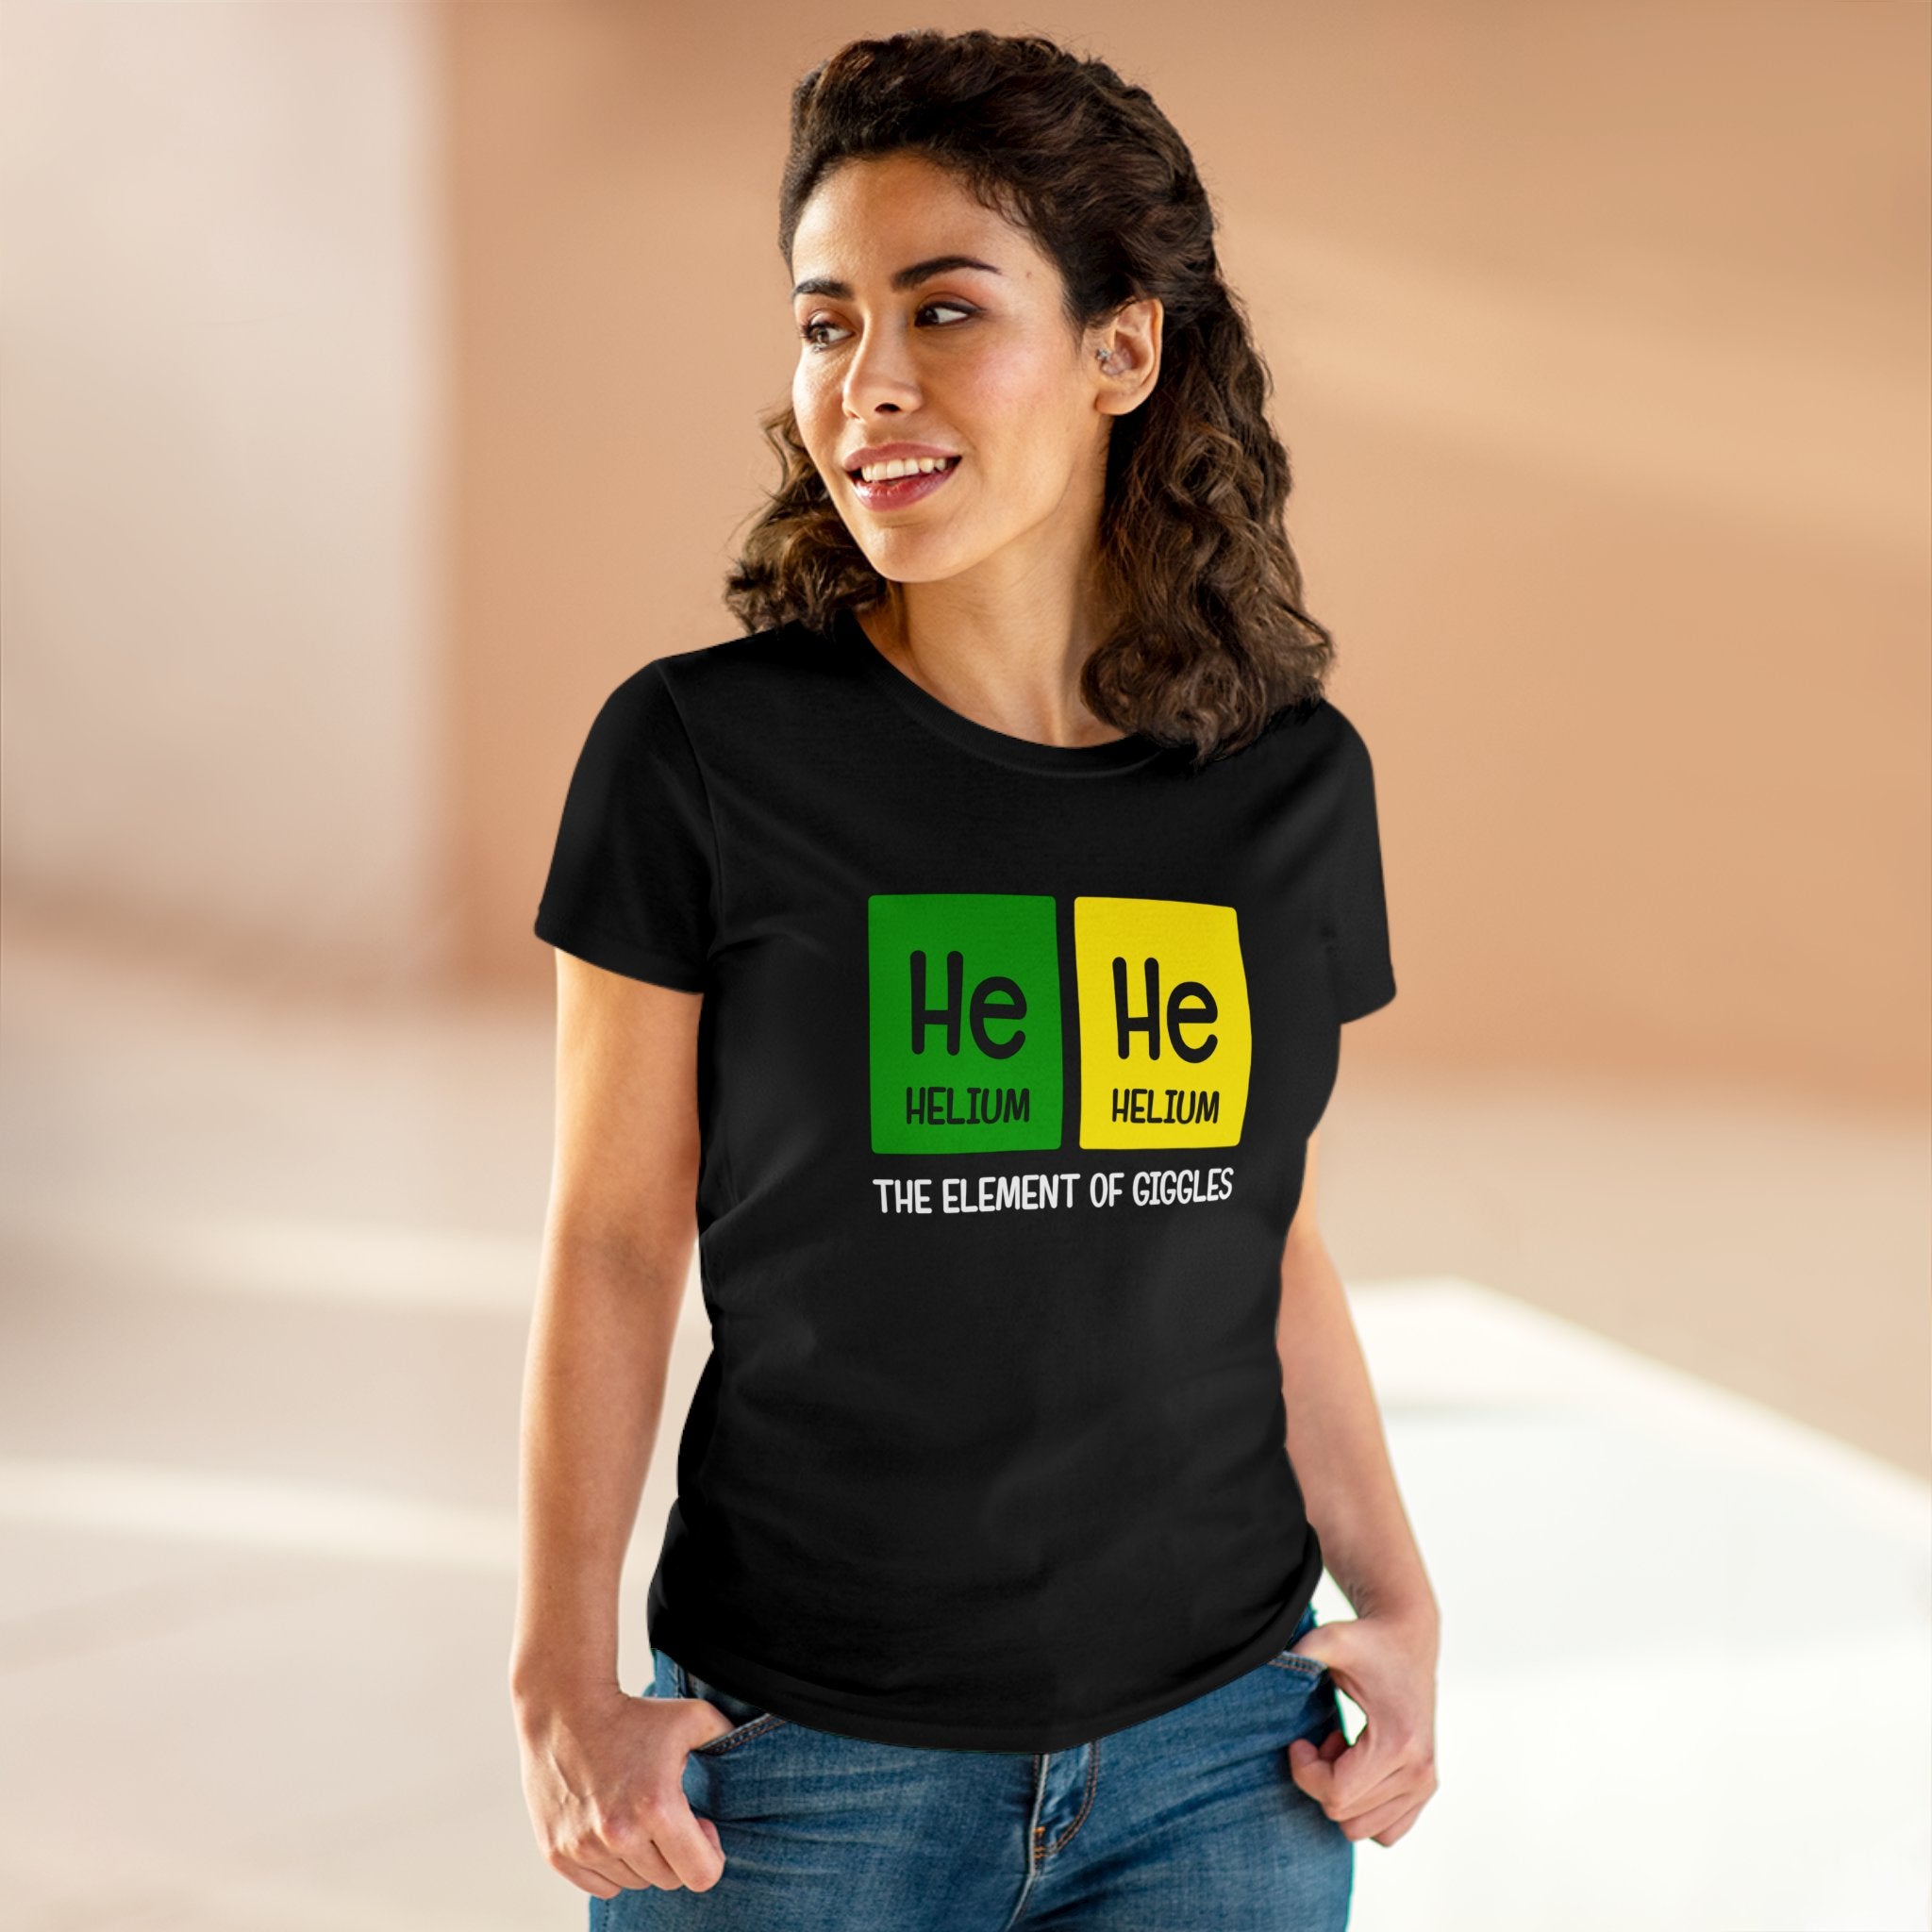 A woman wearing a black T-shirt with a periodic table joke that reads "He-He - Women'sTee" stands indoors with hands in her ethically grown cotton jeans pockets, looking to her right and smiling.